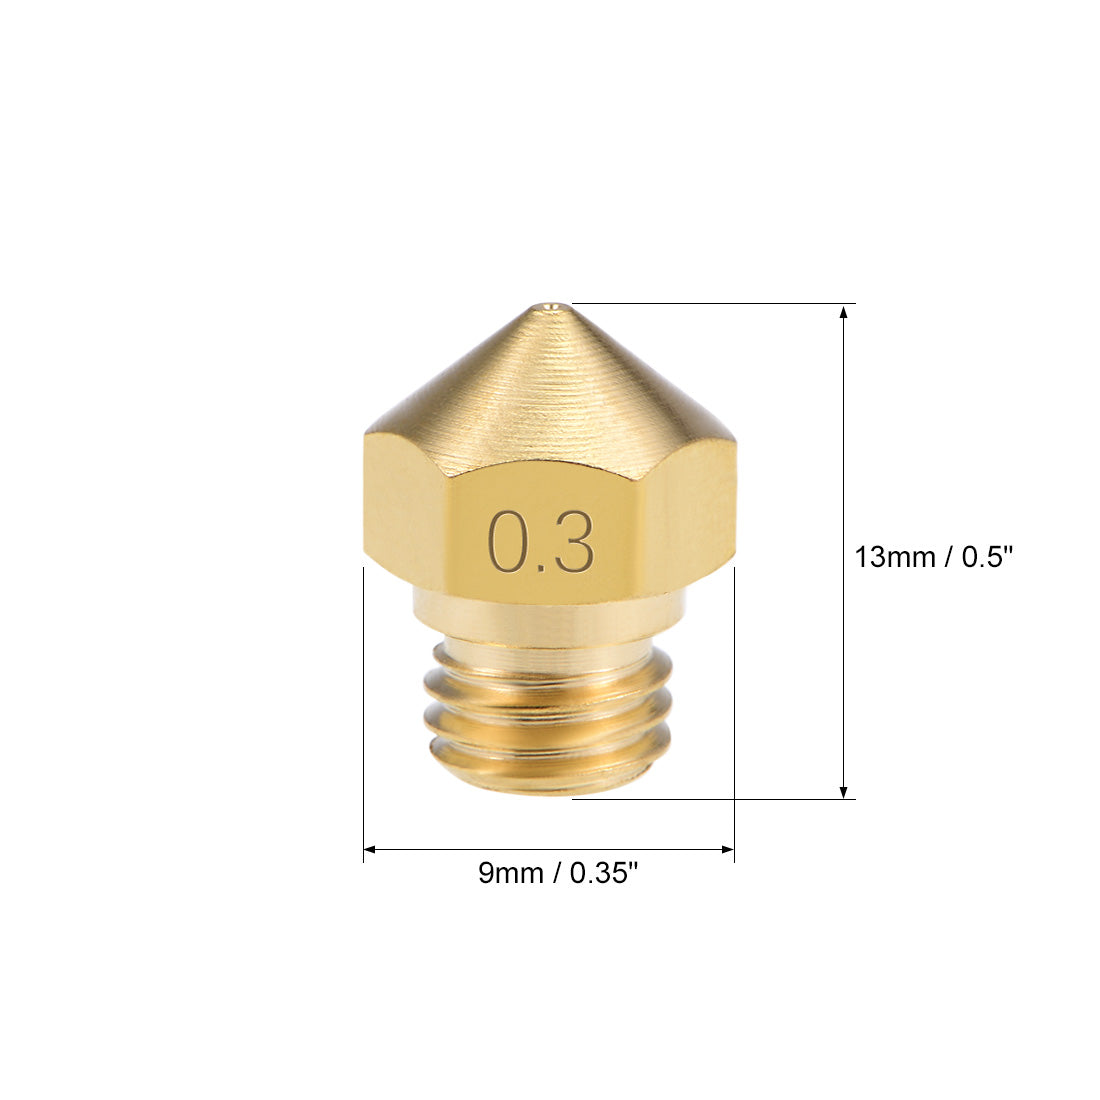 uxcell Uxcell 0.3mm 3D Printer Nozzle Head M7 for MK10 Extruder Print, Brass 5pcs